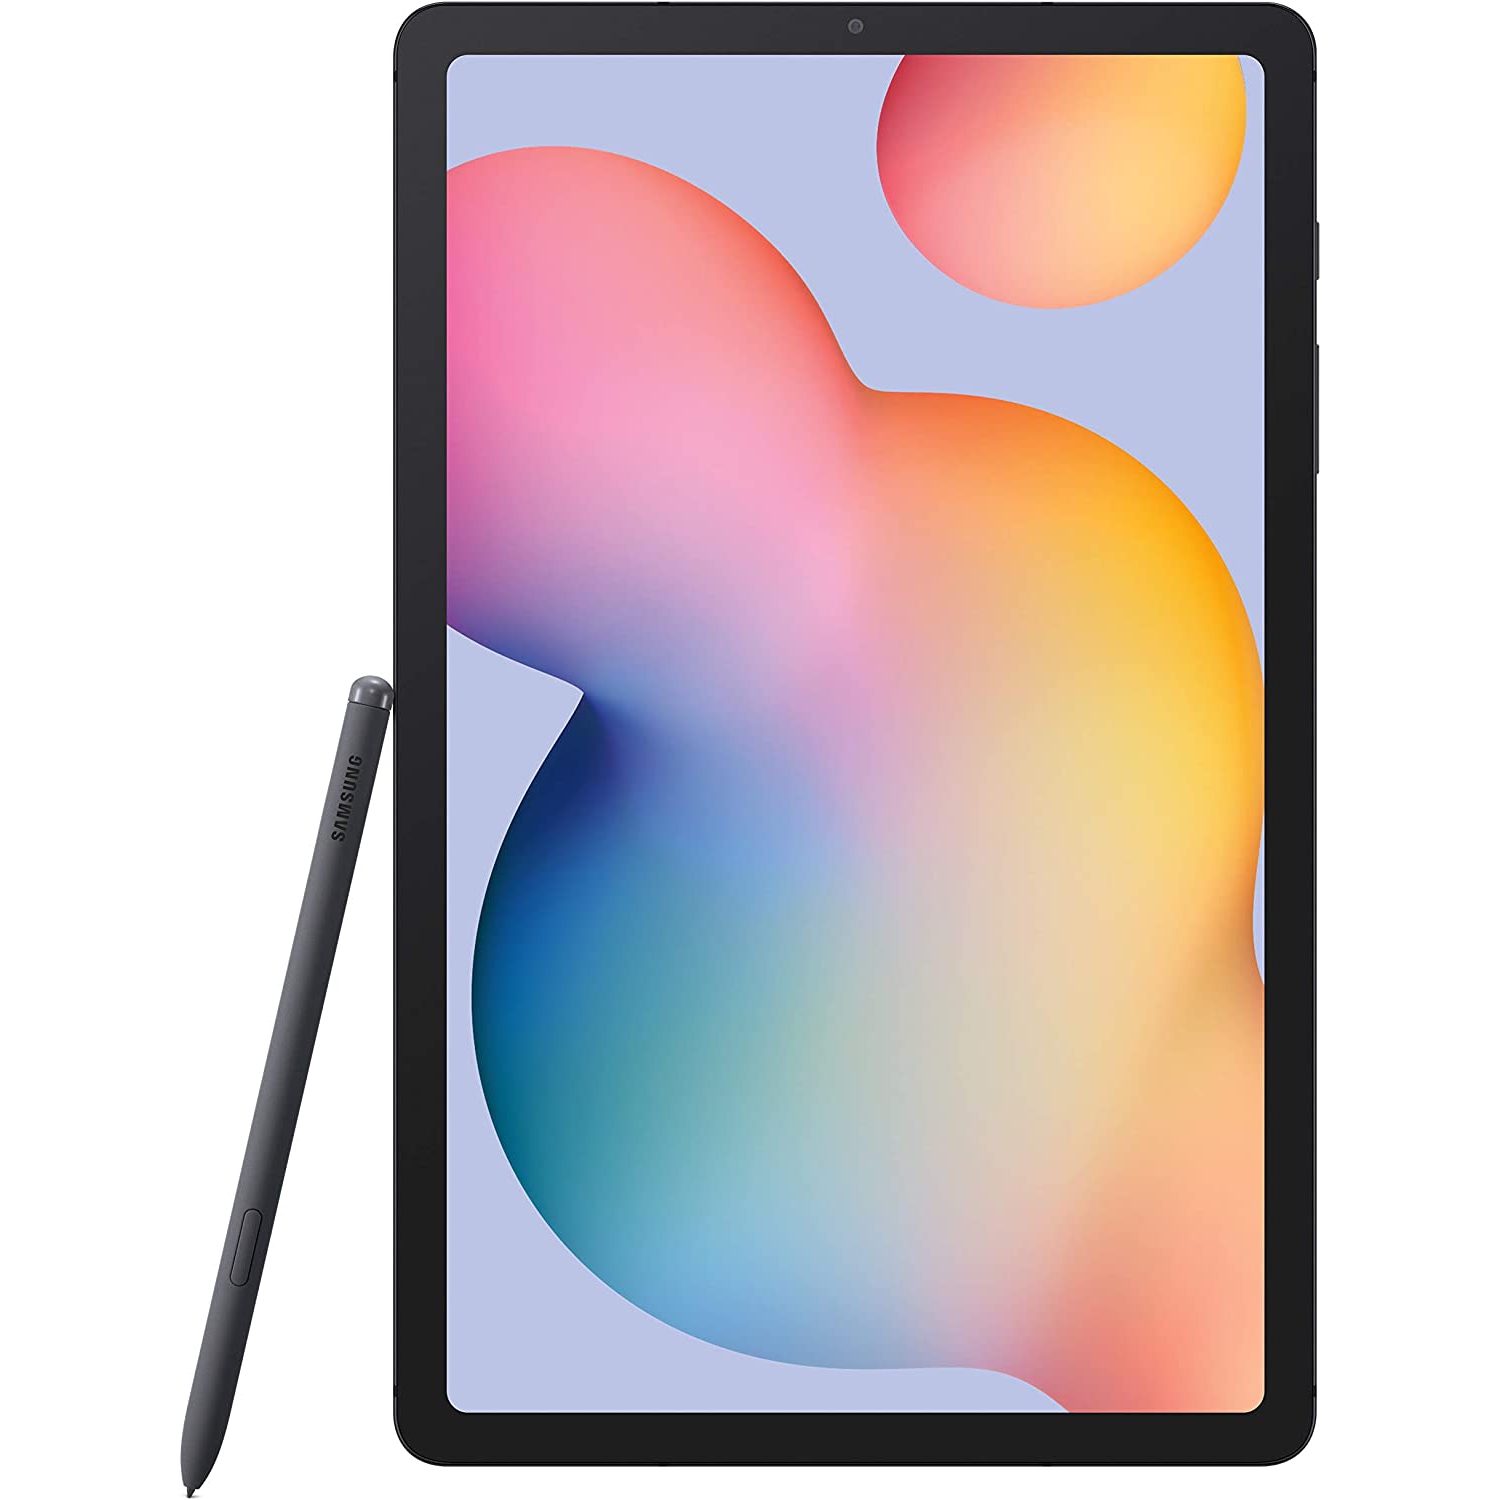 SAMSUNG Galaxy Tab S6 Lite 10.4" 64GB Android Tablet w/ Long Lasting Battery, S Pen Included, Slim Metal Design, AKG Dual Speakers, US Version, Oxford Gray